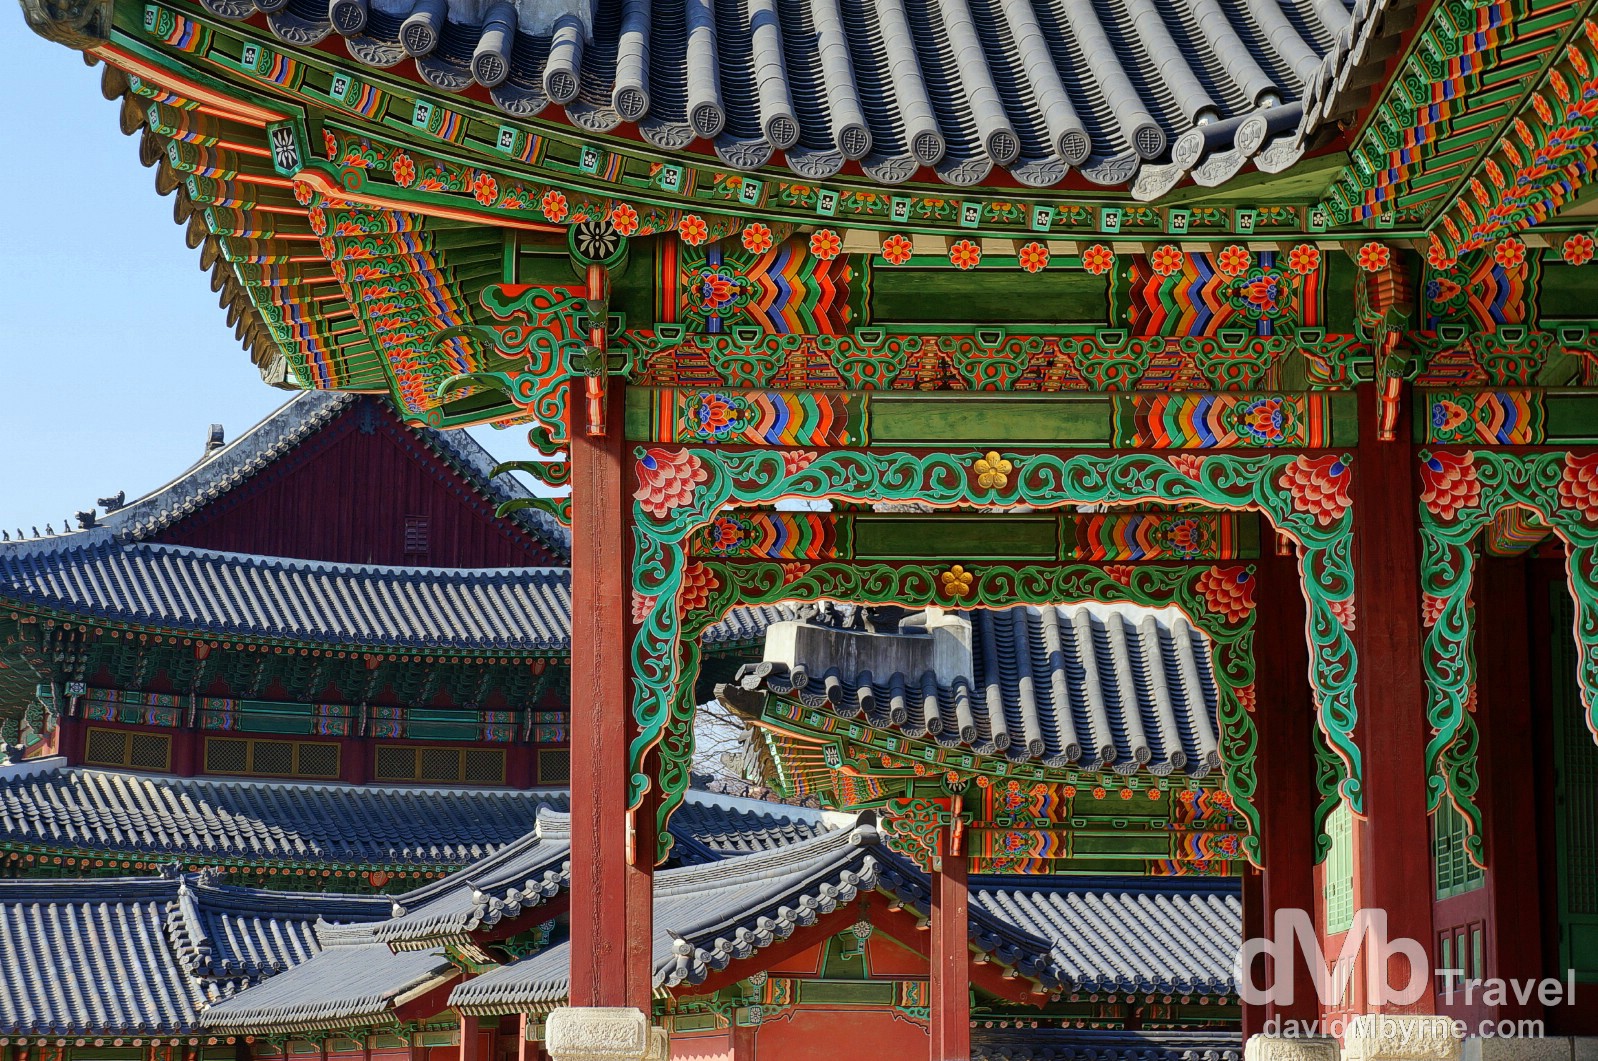 Buildings in the grounds of the UNESCO World Heritage-listed Changdeokgung Palace Complex in Seoul, South Korea. January 18th 2014